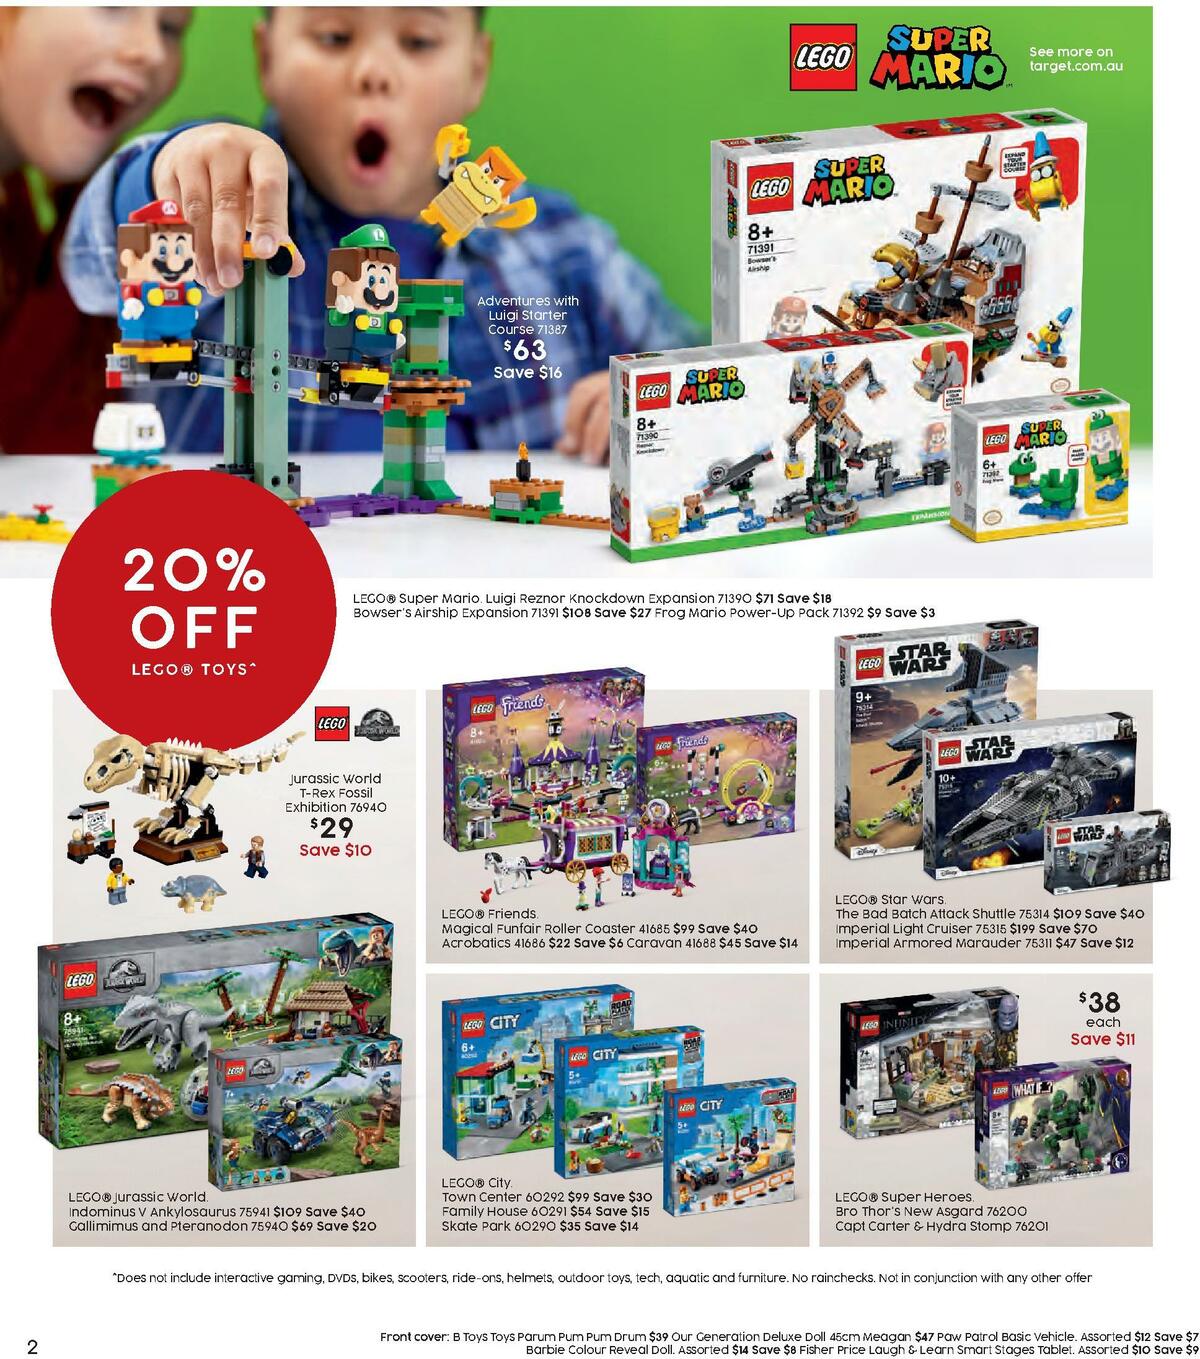 Target Toy sale Catalogues from 16 September